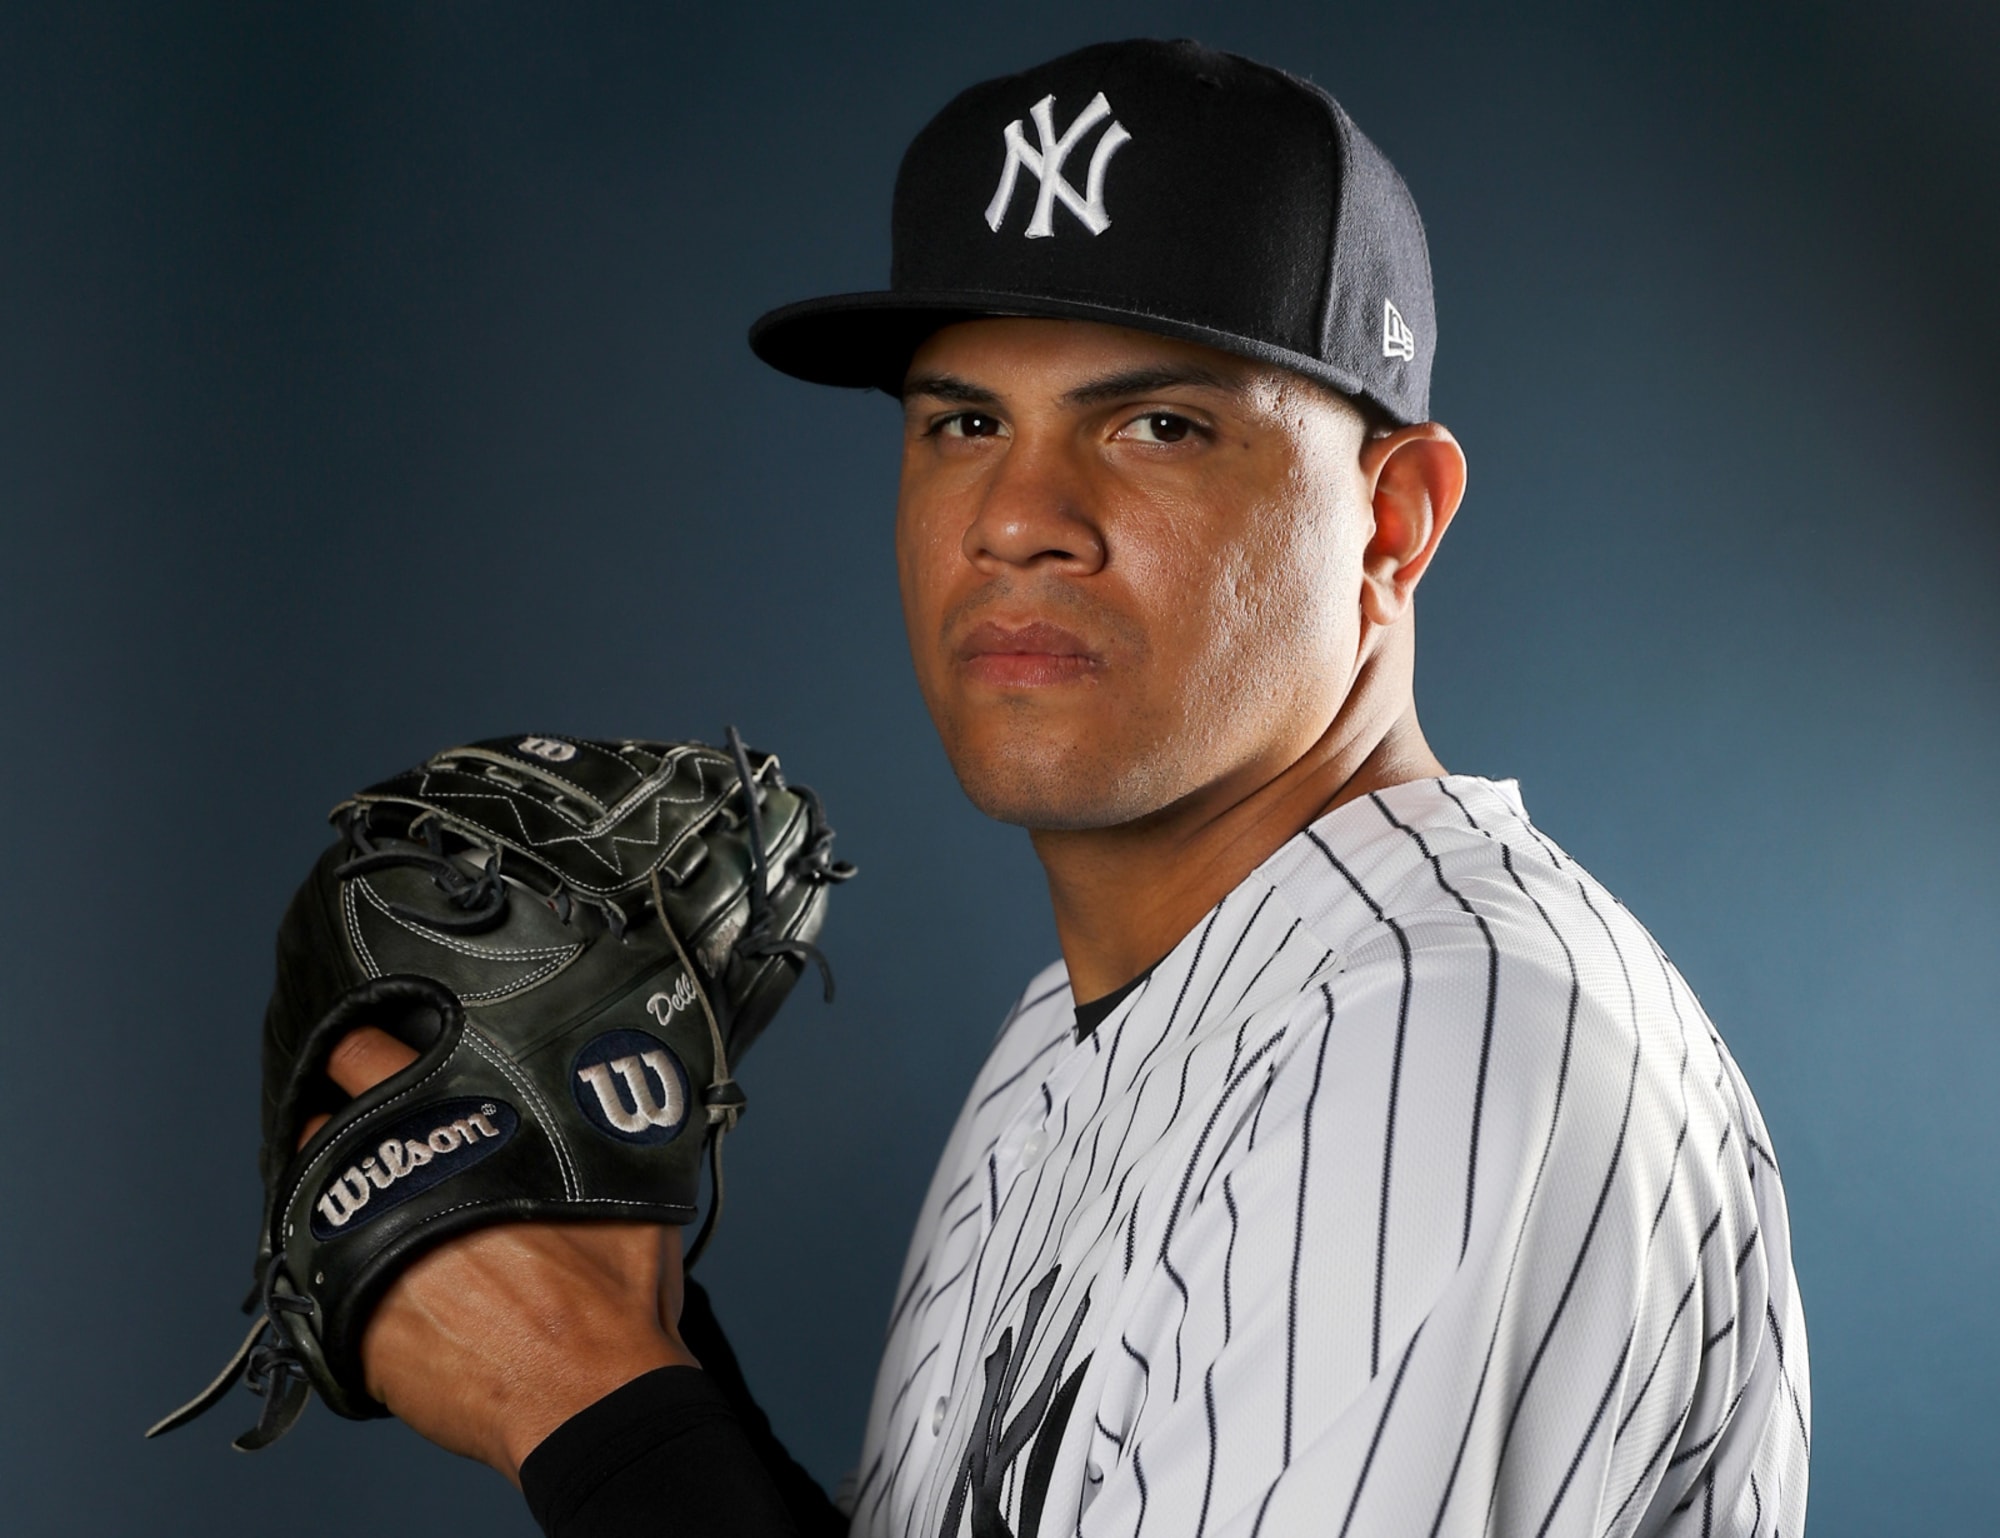 Dellin Betances: “All I Care About Is Winning” - Metsmerized Online